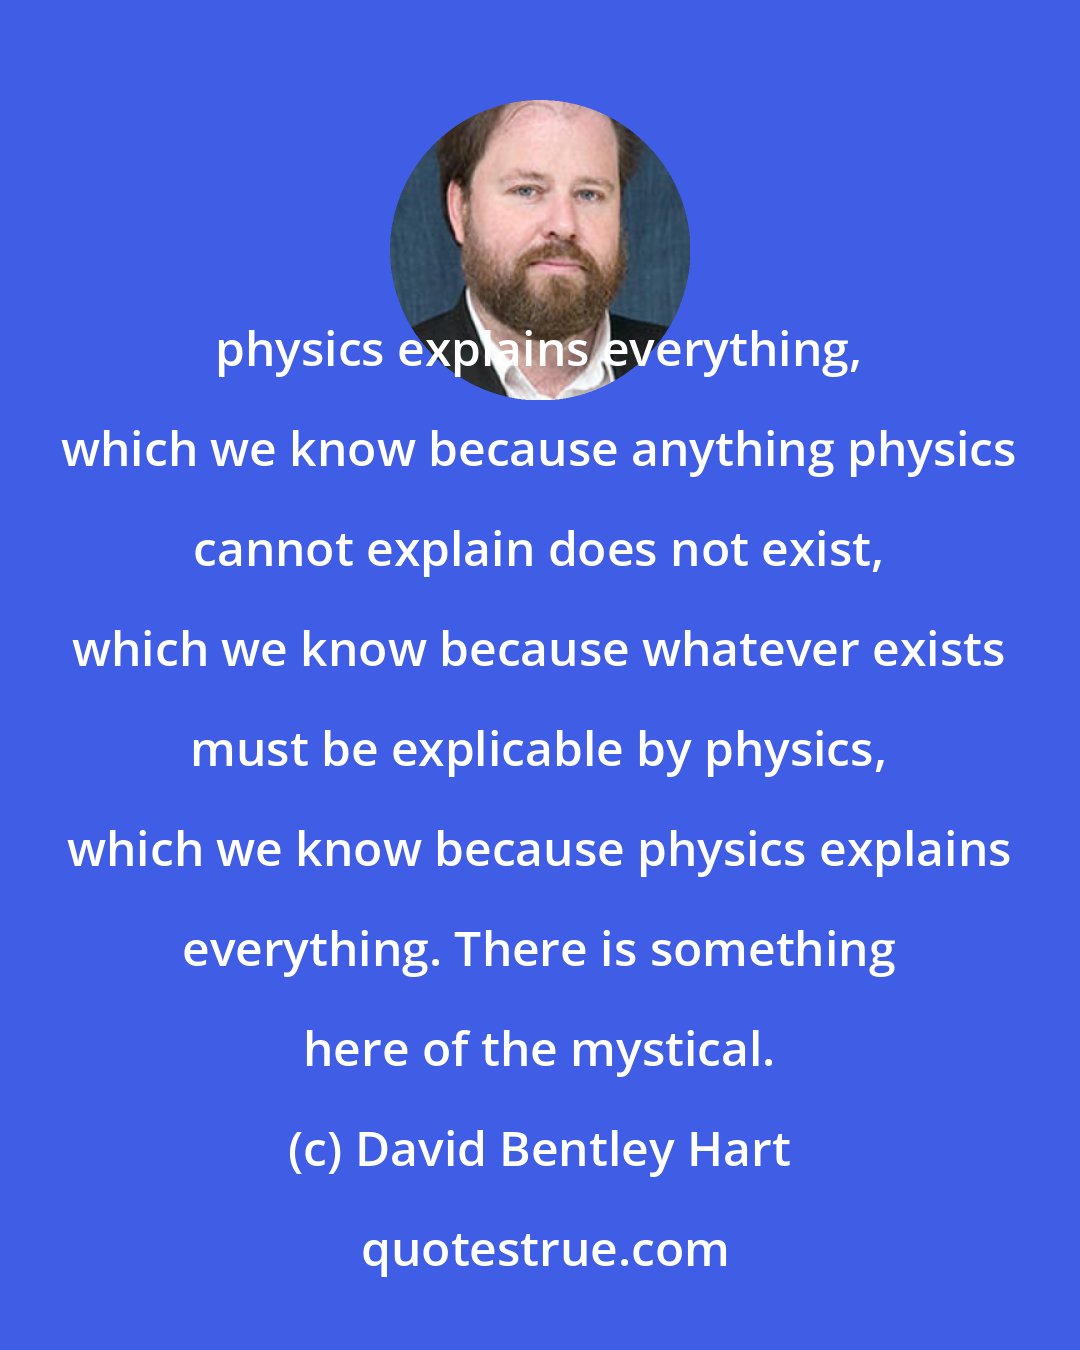 David Bentley Hart: physics explains everything, which we know because anything physics cannot explain does not exist, which we know because whatever exists must be explicable by physics, which we know because physics explains everything. There is something here of the mystical.